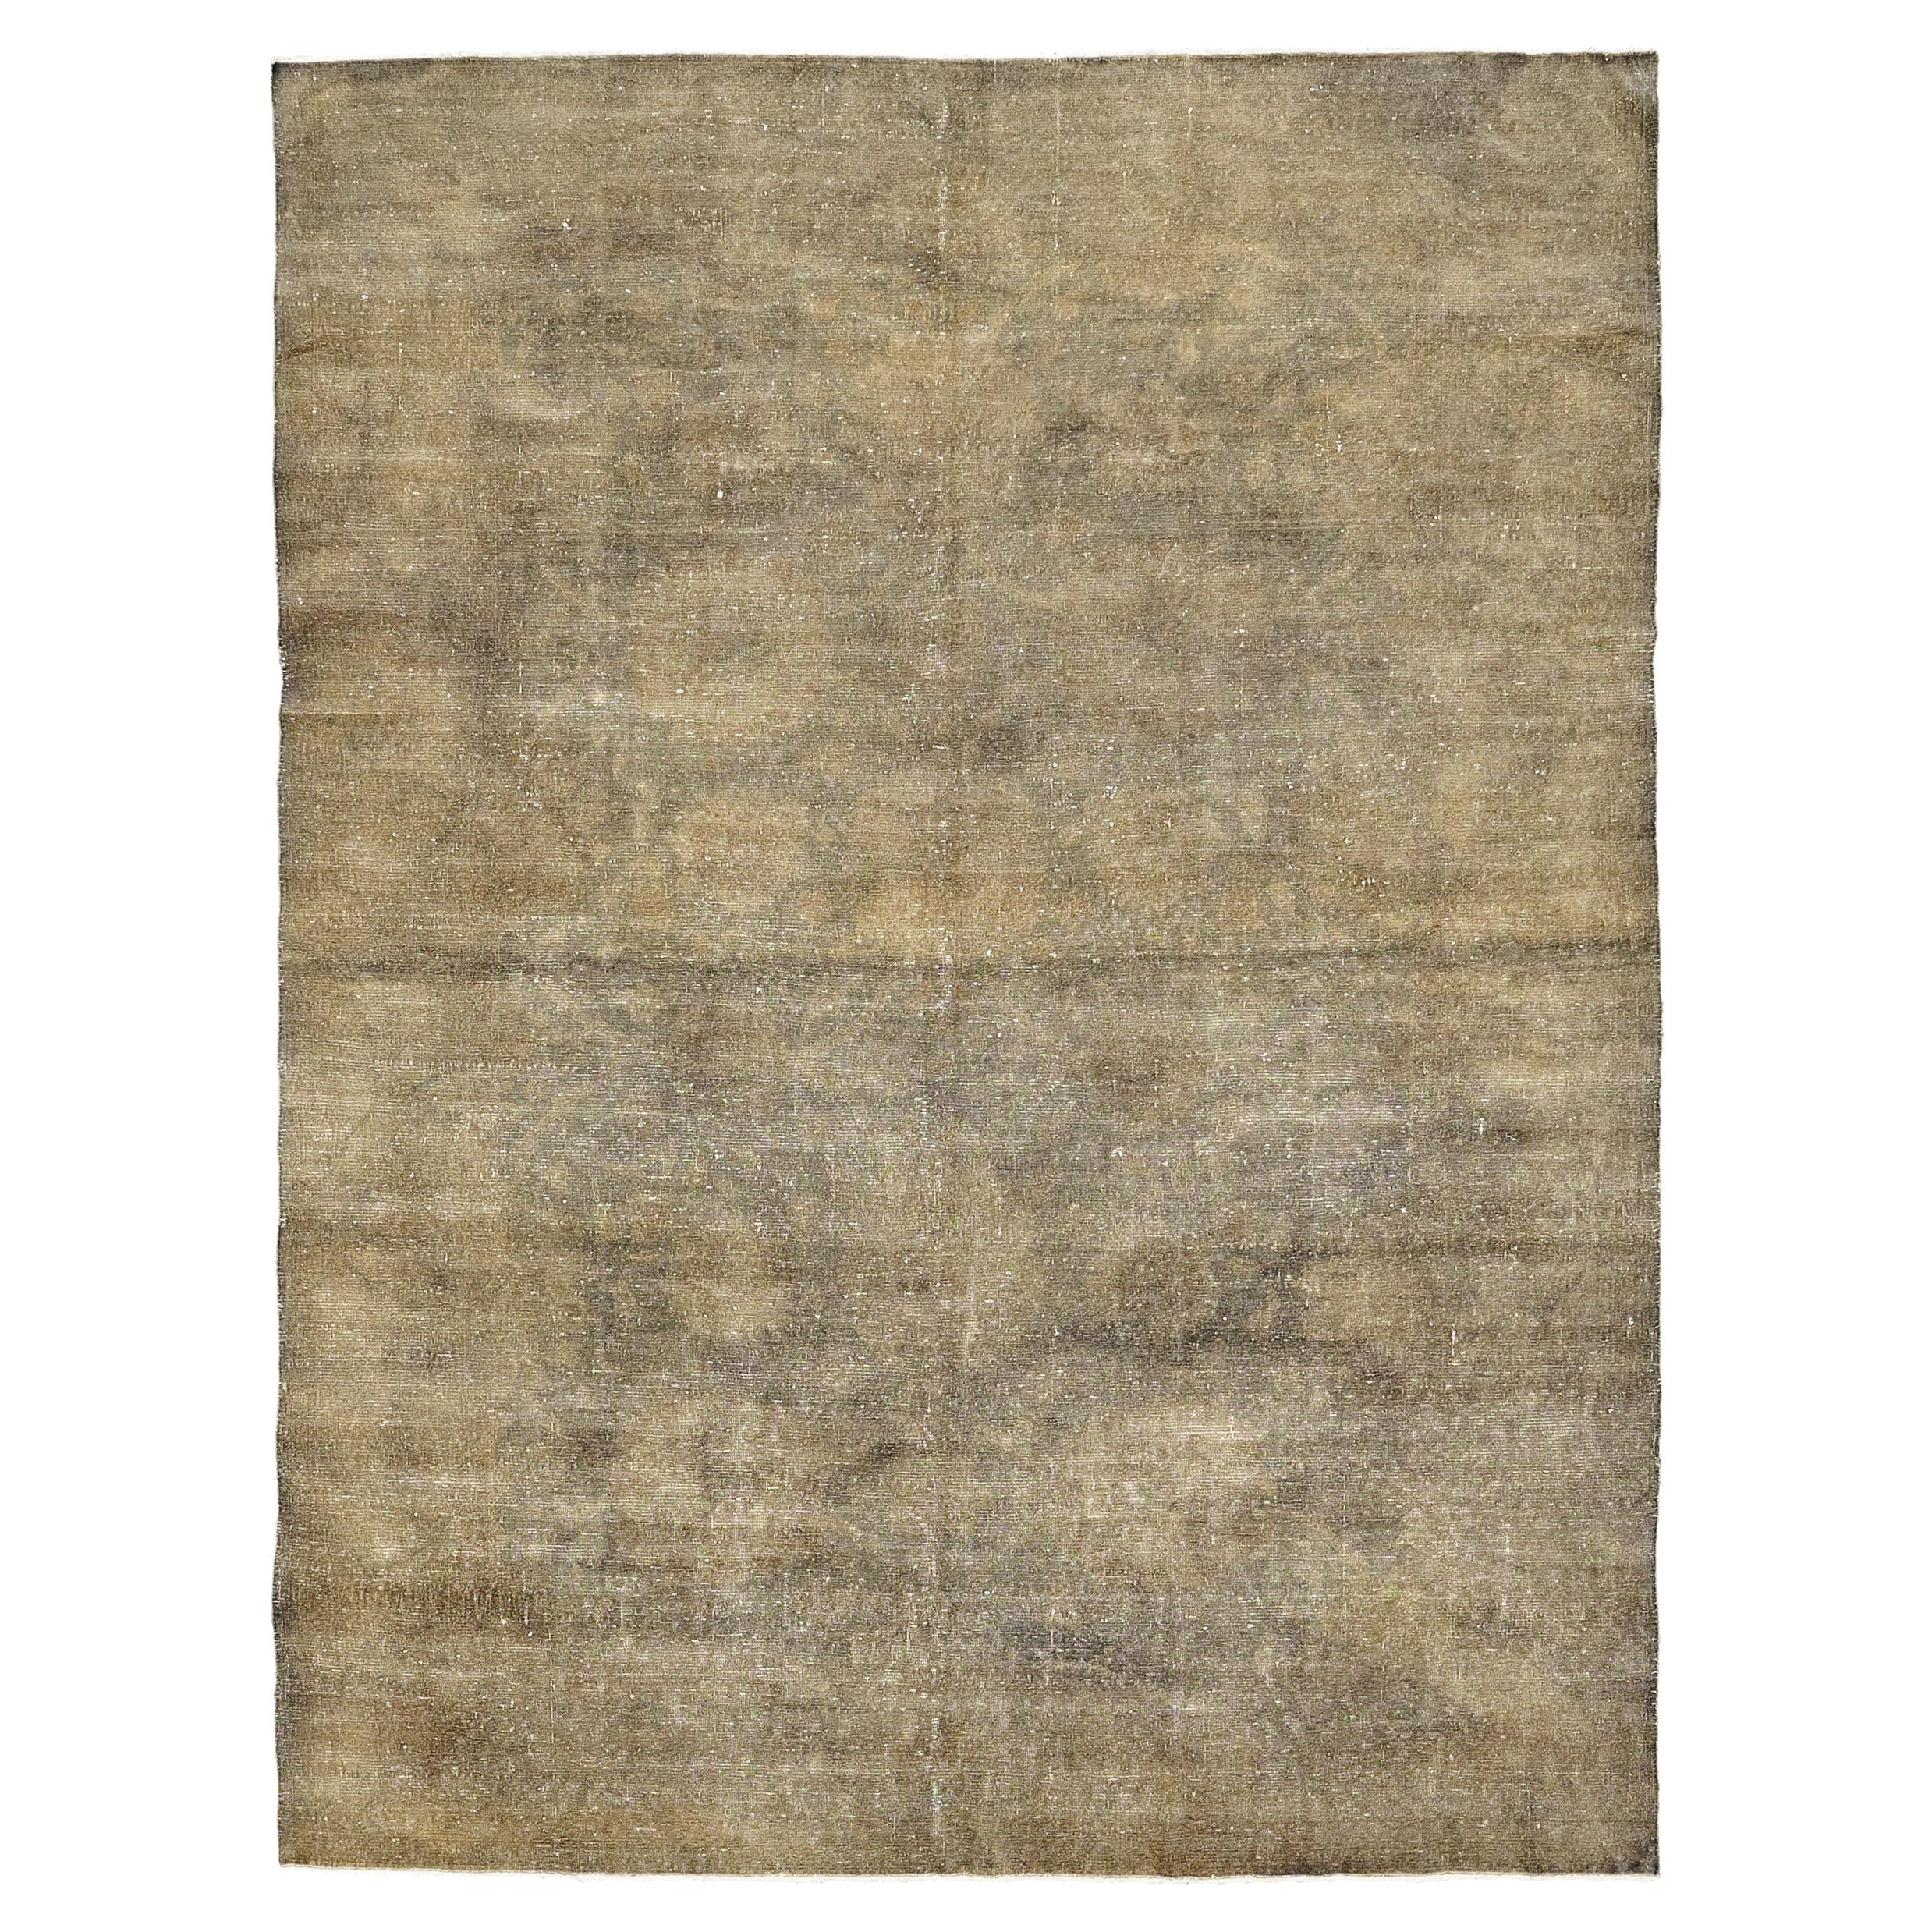 CANT LOCATE Overdyed Anatolian Rug